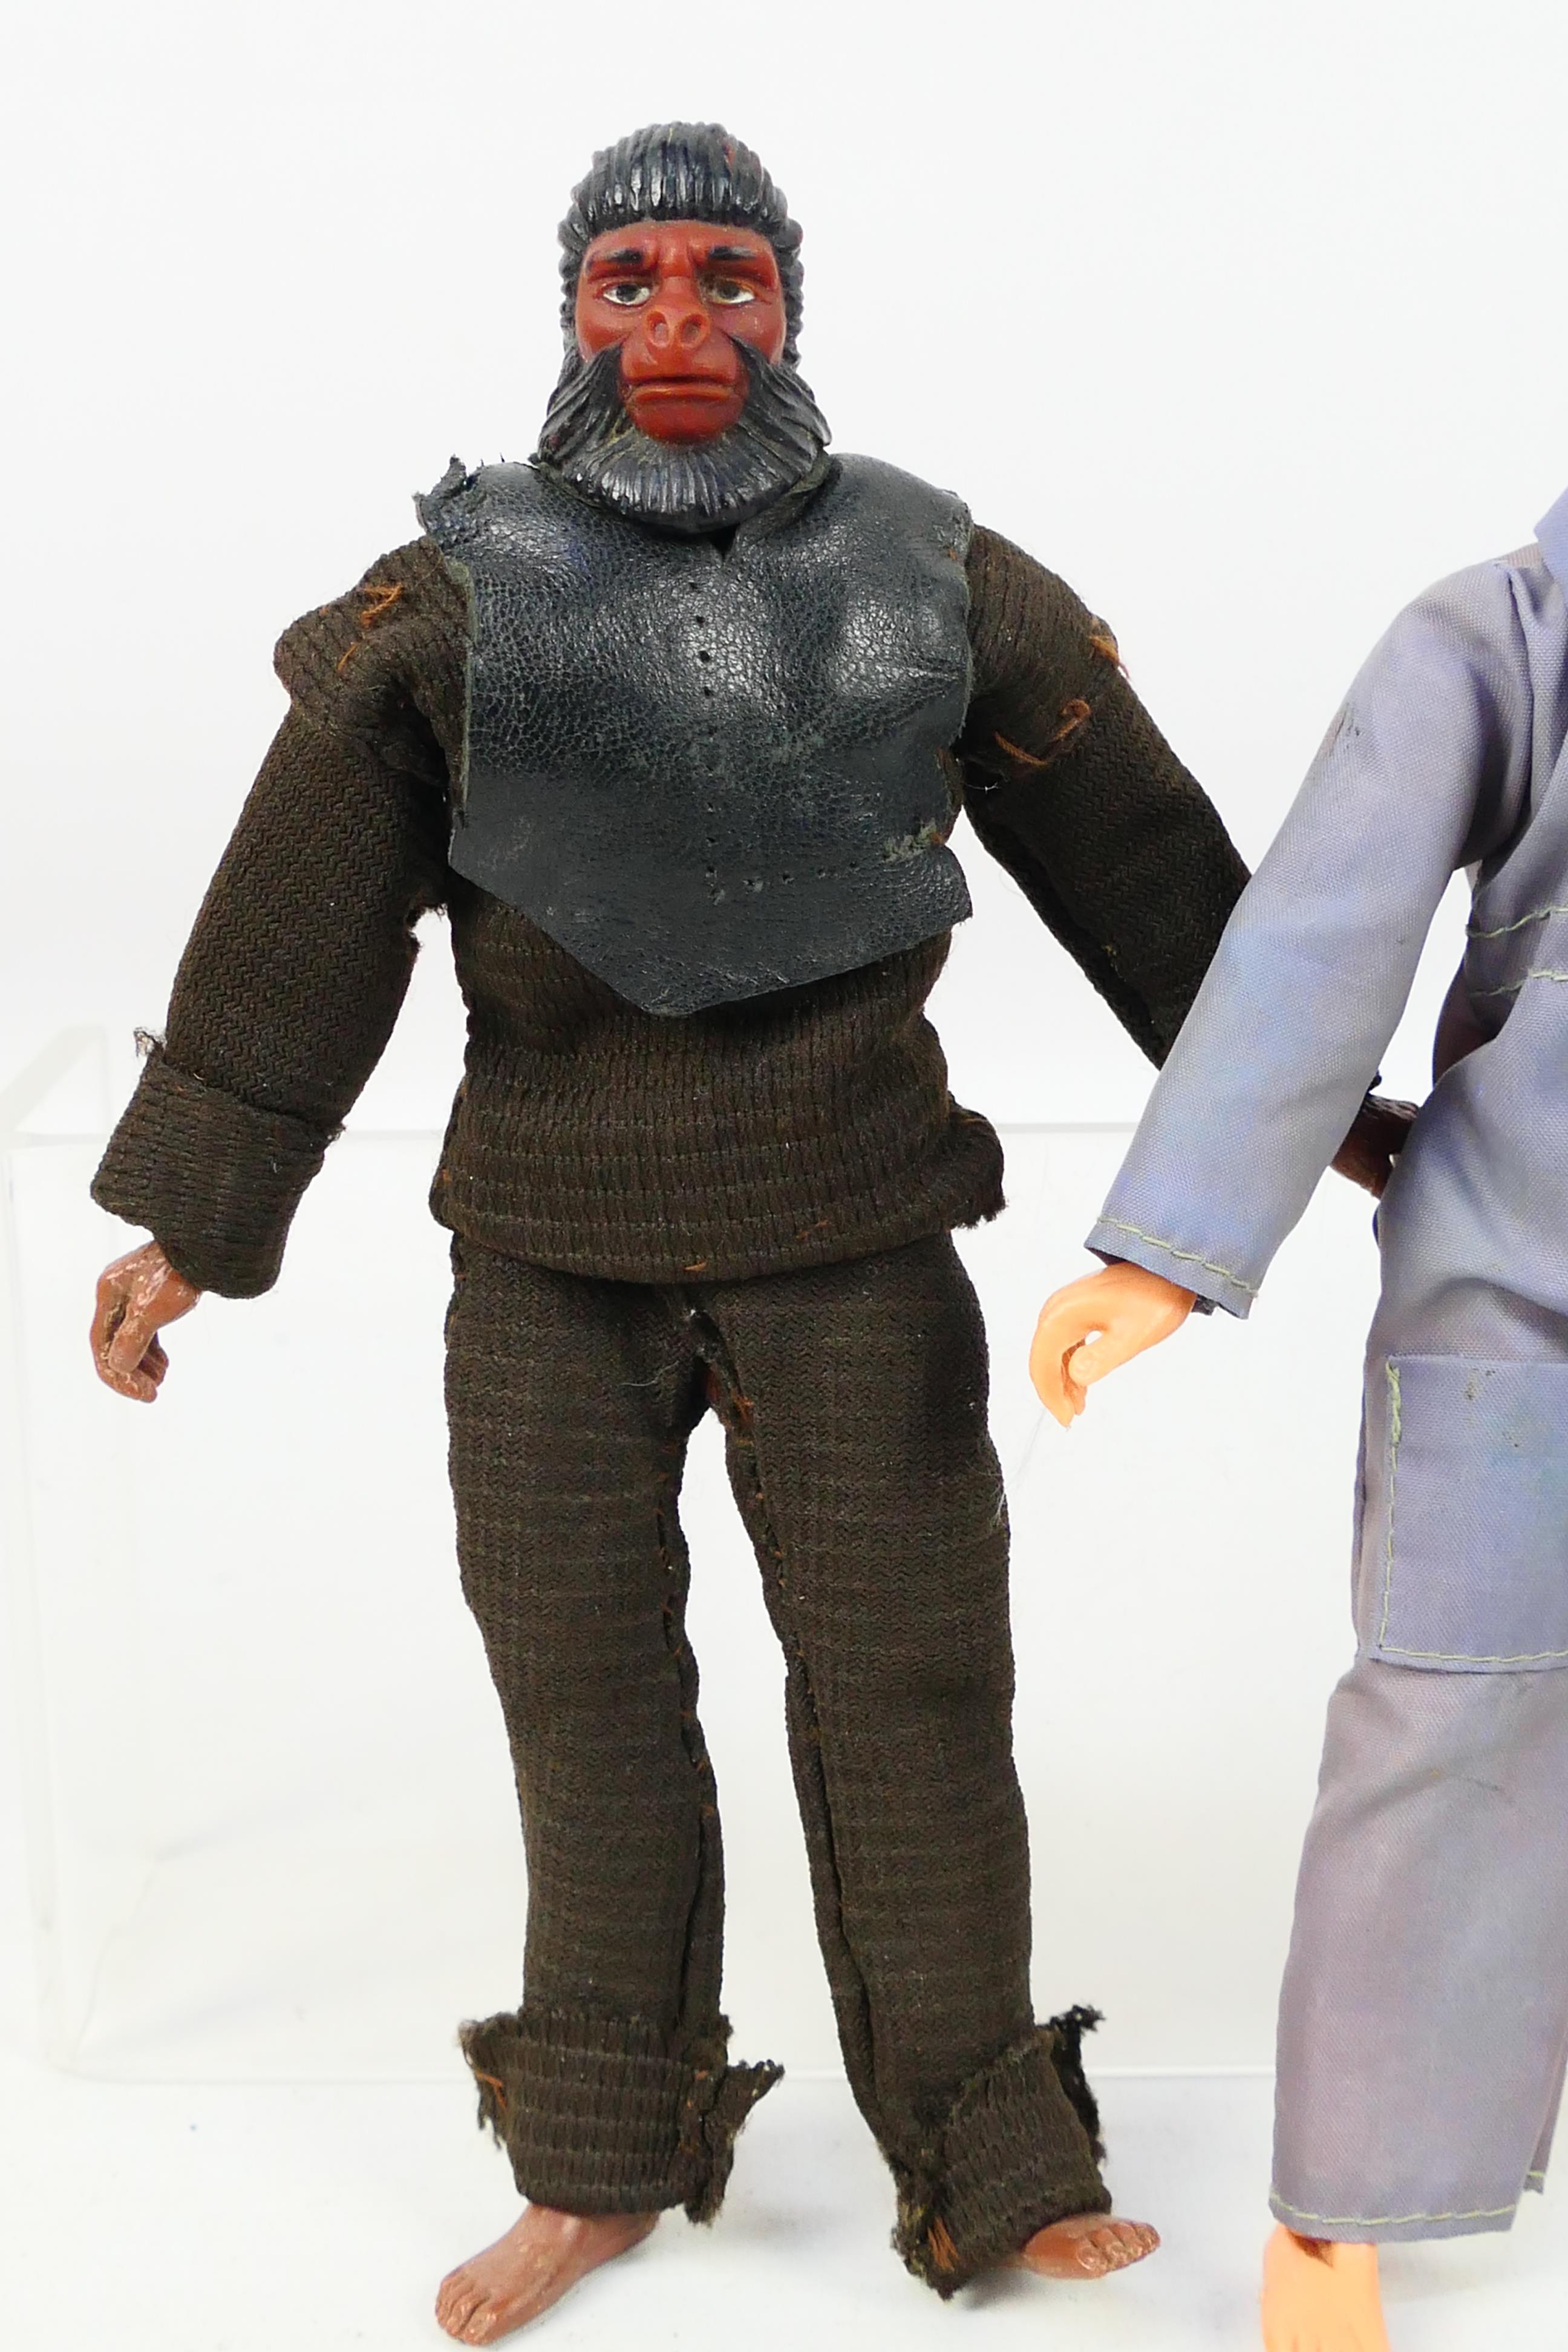 Mego Corp - Apjac - Planet of the Apes - A pair of 8" action figures from The Planet of The Apes - Image 2 of 6